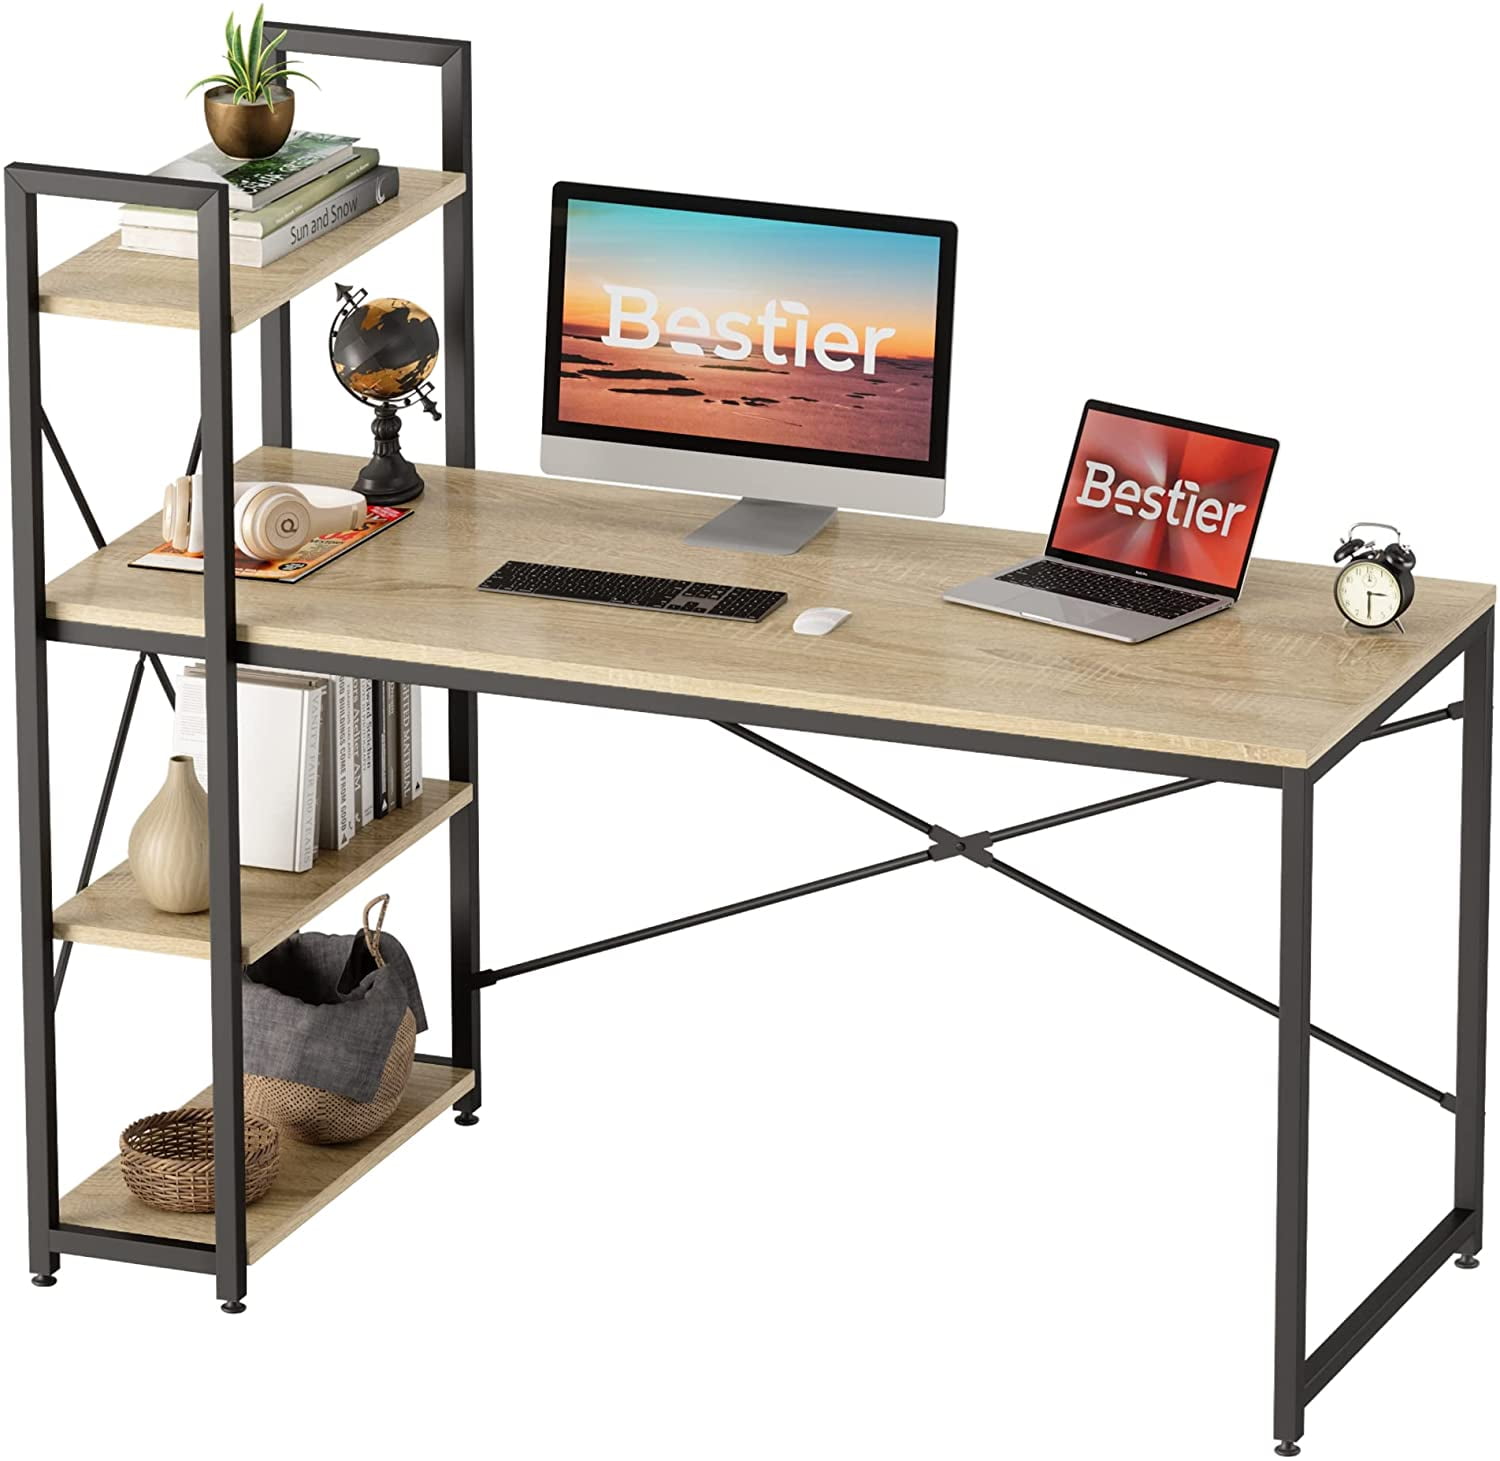 Rustic Brown Bestier Industrial Desk with Storage Drawers 55 inch Writing Study Computer Table Workstation with Keyboard Tray for Home Office